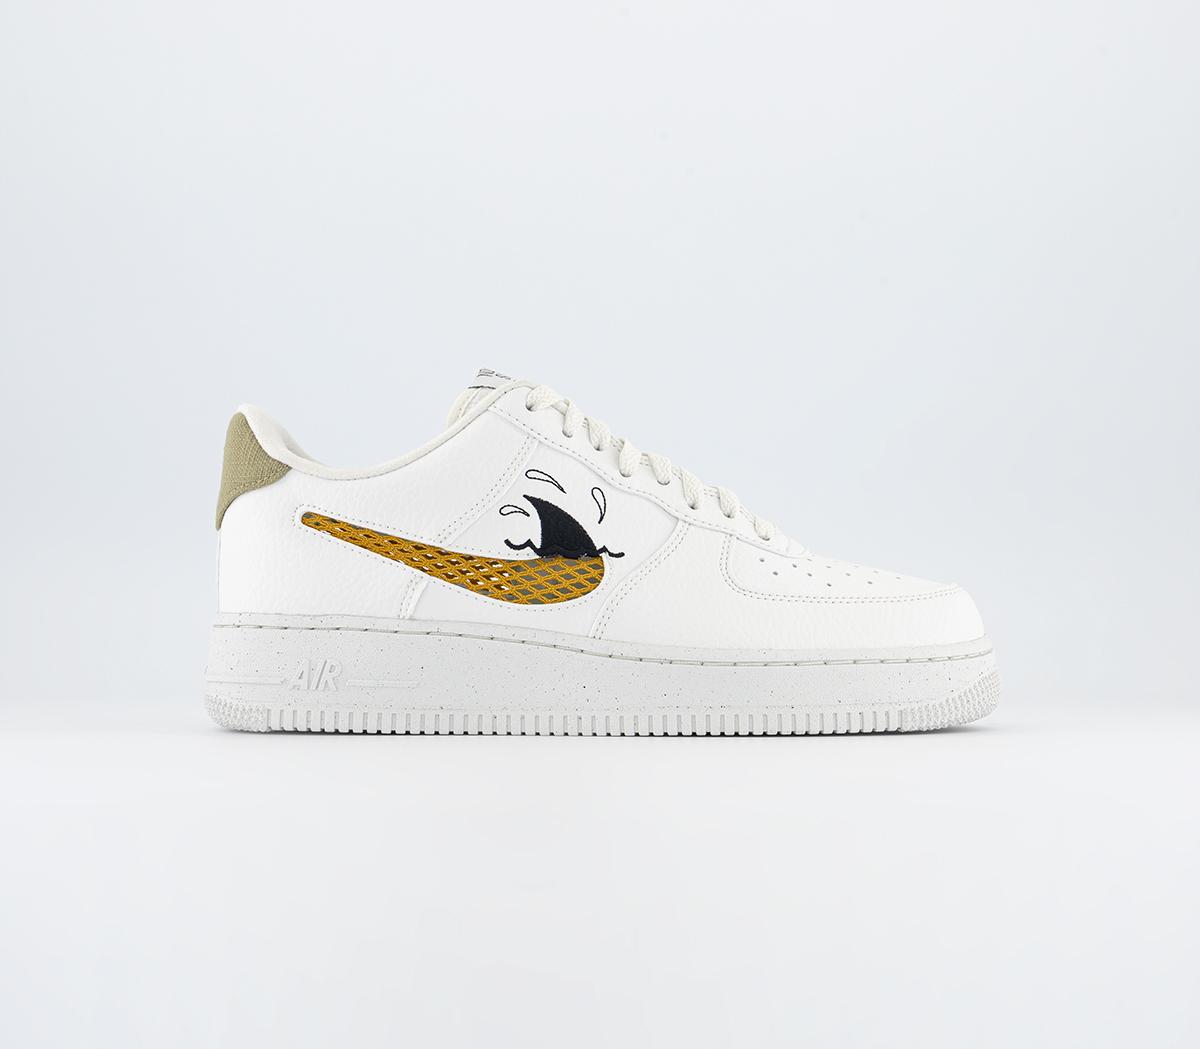 Nike Air Force 1 Lv8 Trainers Sail Sanded Gold Black Wheat Grass - Nike ...